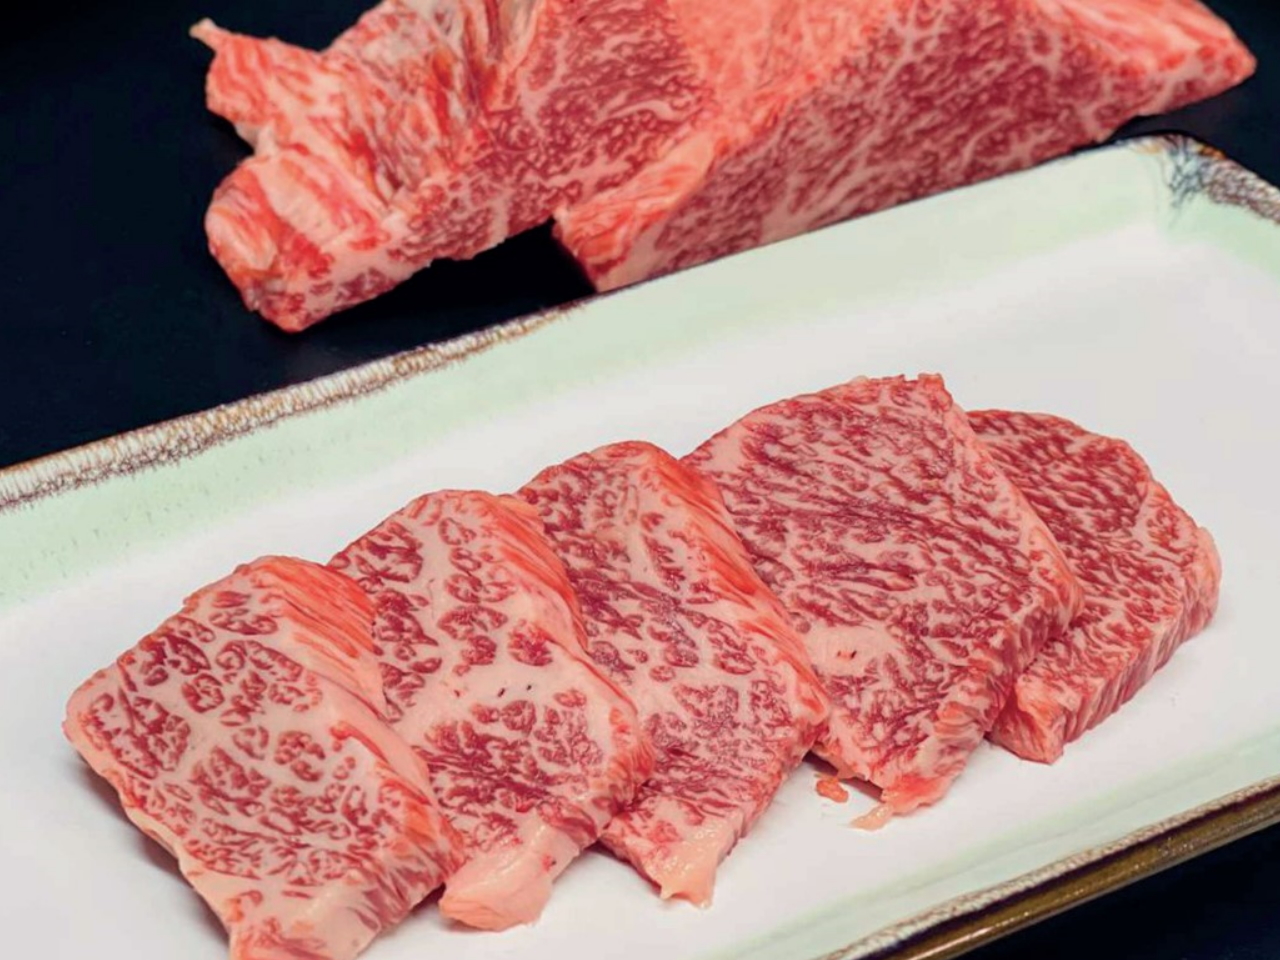 Wagyu Beef Wholesale KL Kuala Lumpur | Best Halal Premium A5 Japanese Wagyu Beef | Direct imported from Japan